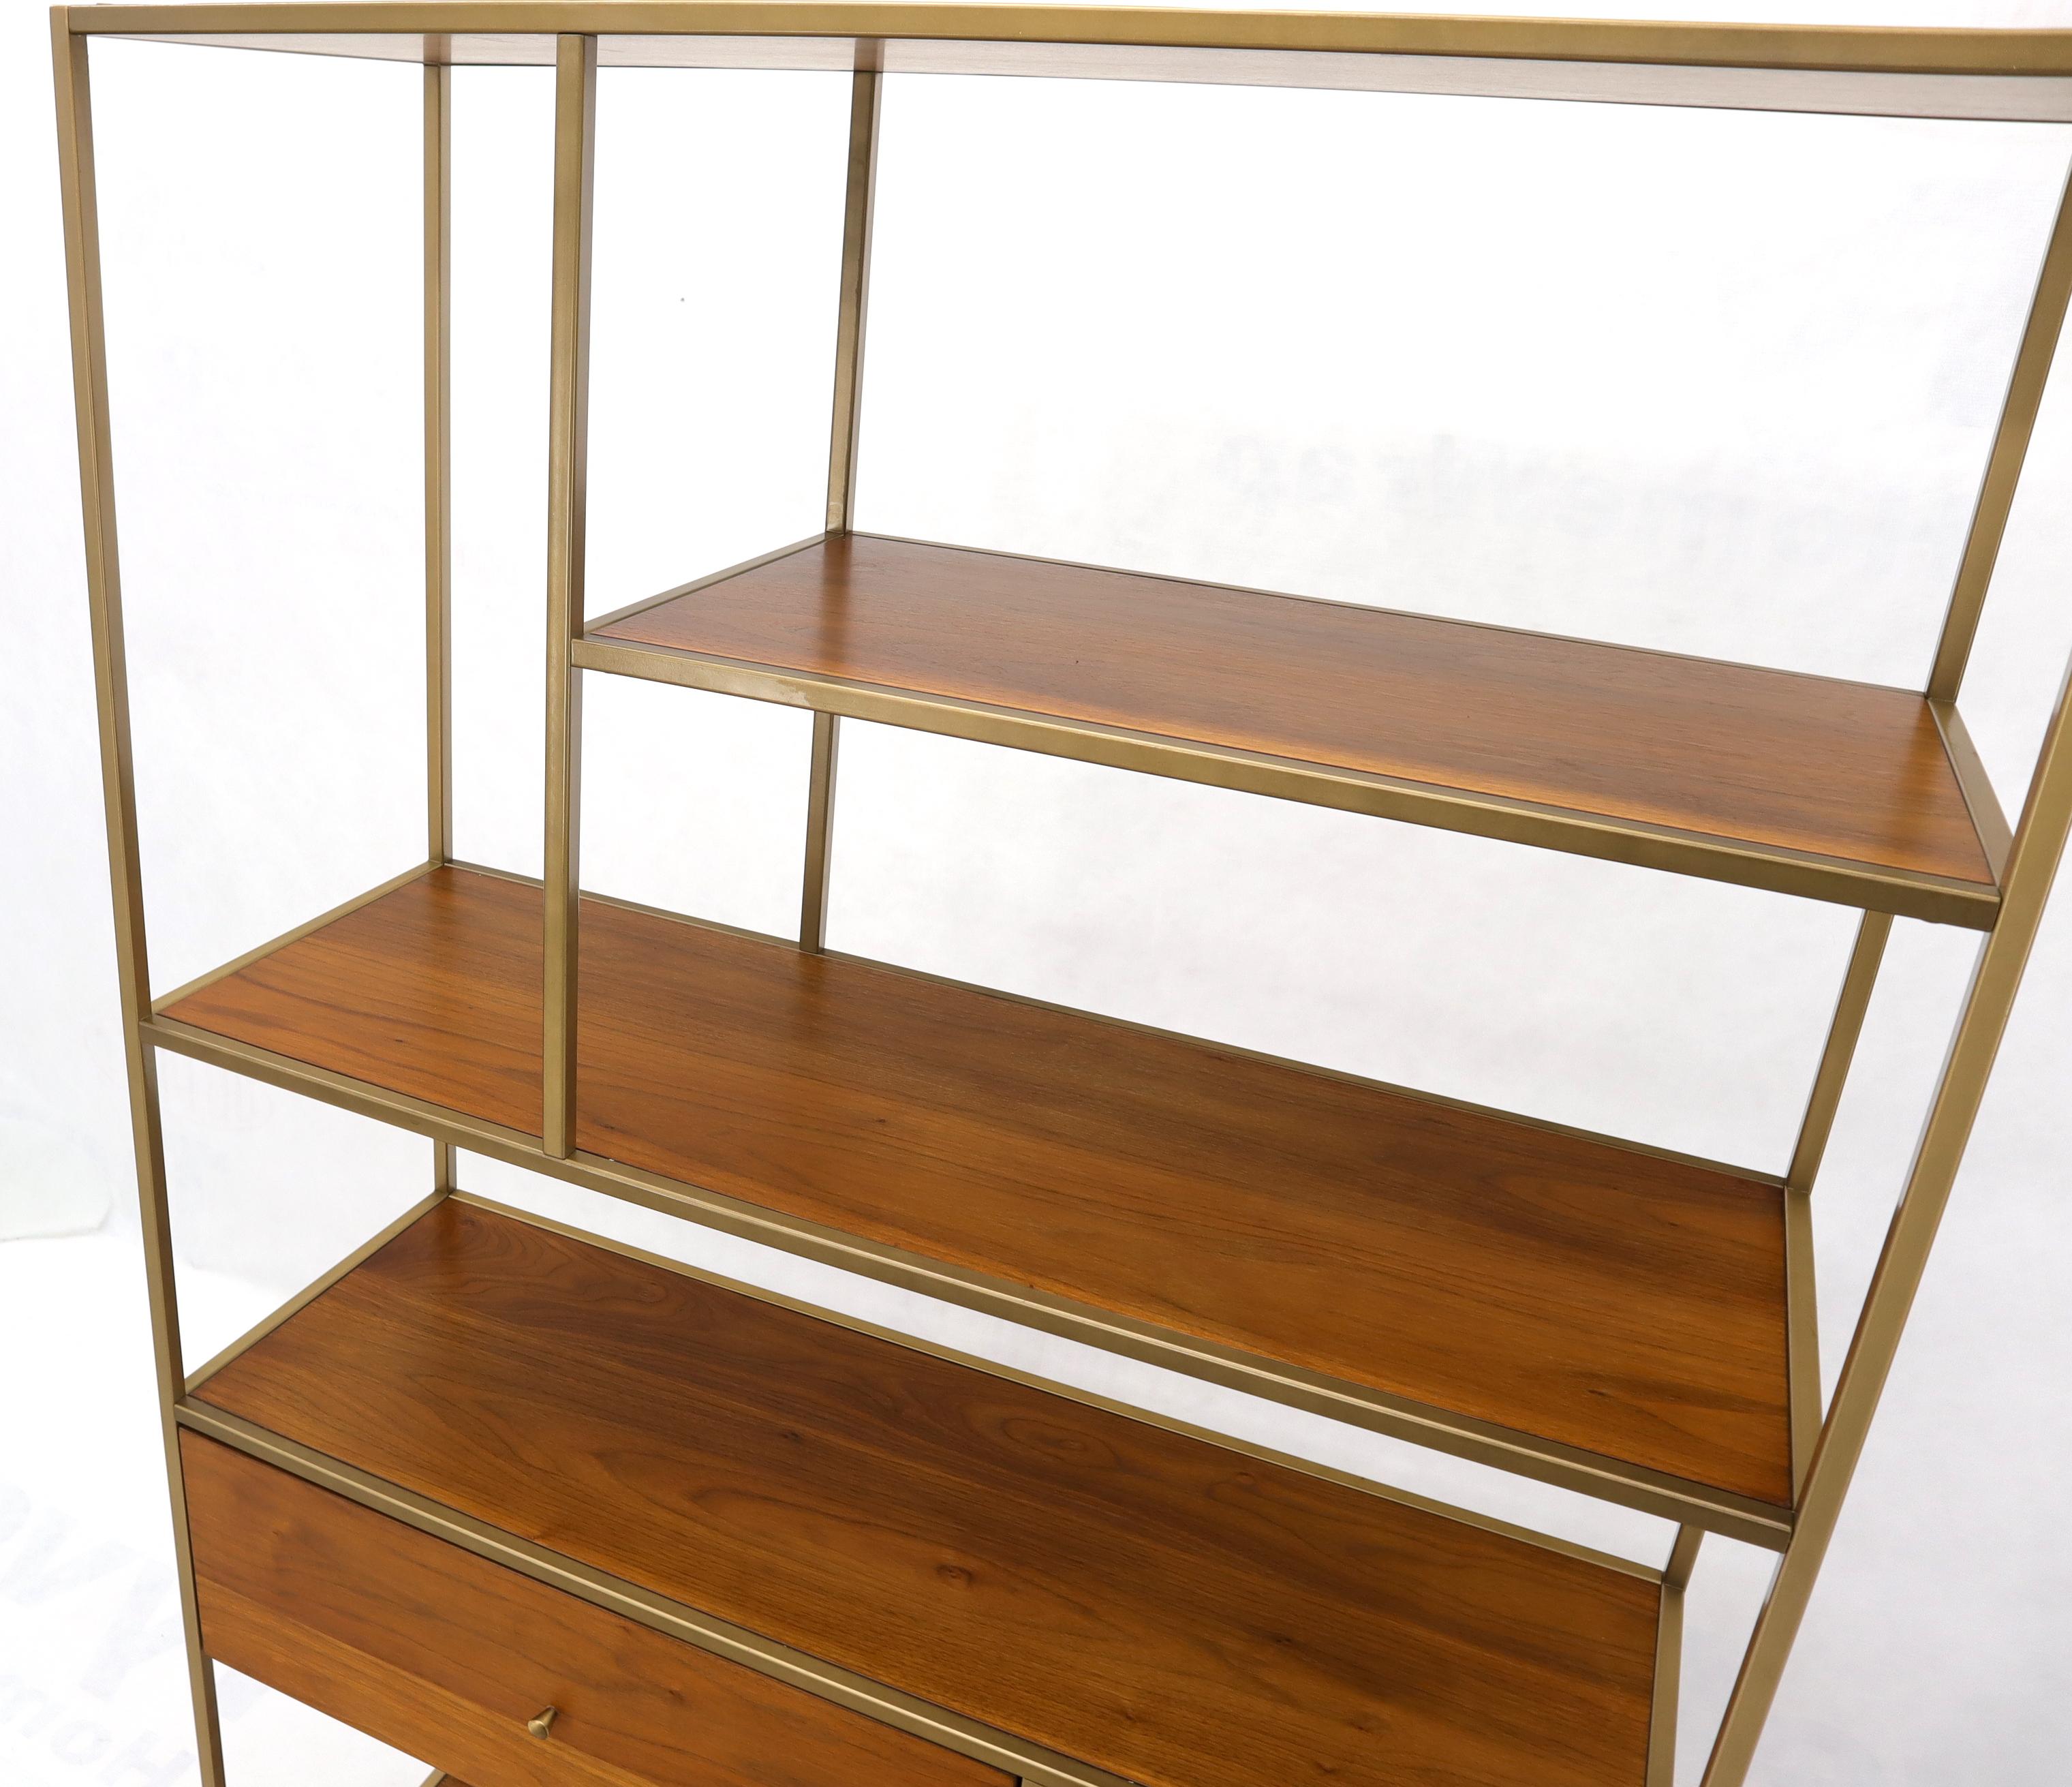 Contemporary Walnut and Brass Étagère Bookcase Shelving Wall Unit McCobb Style